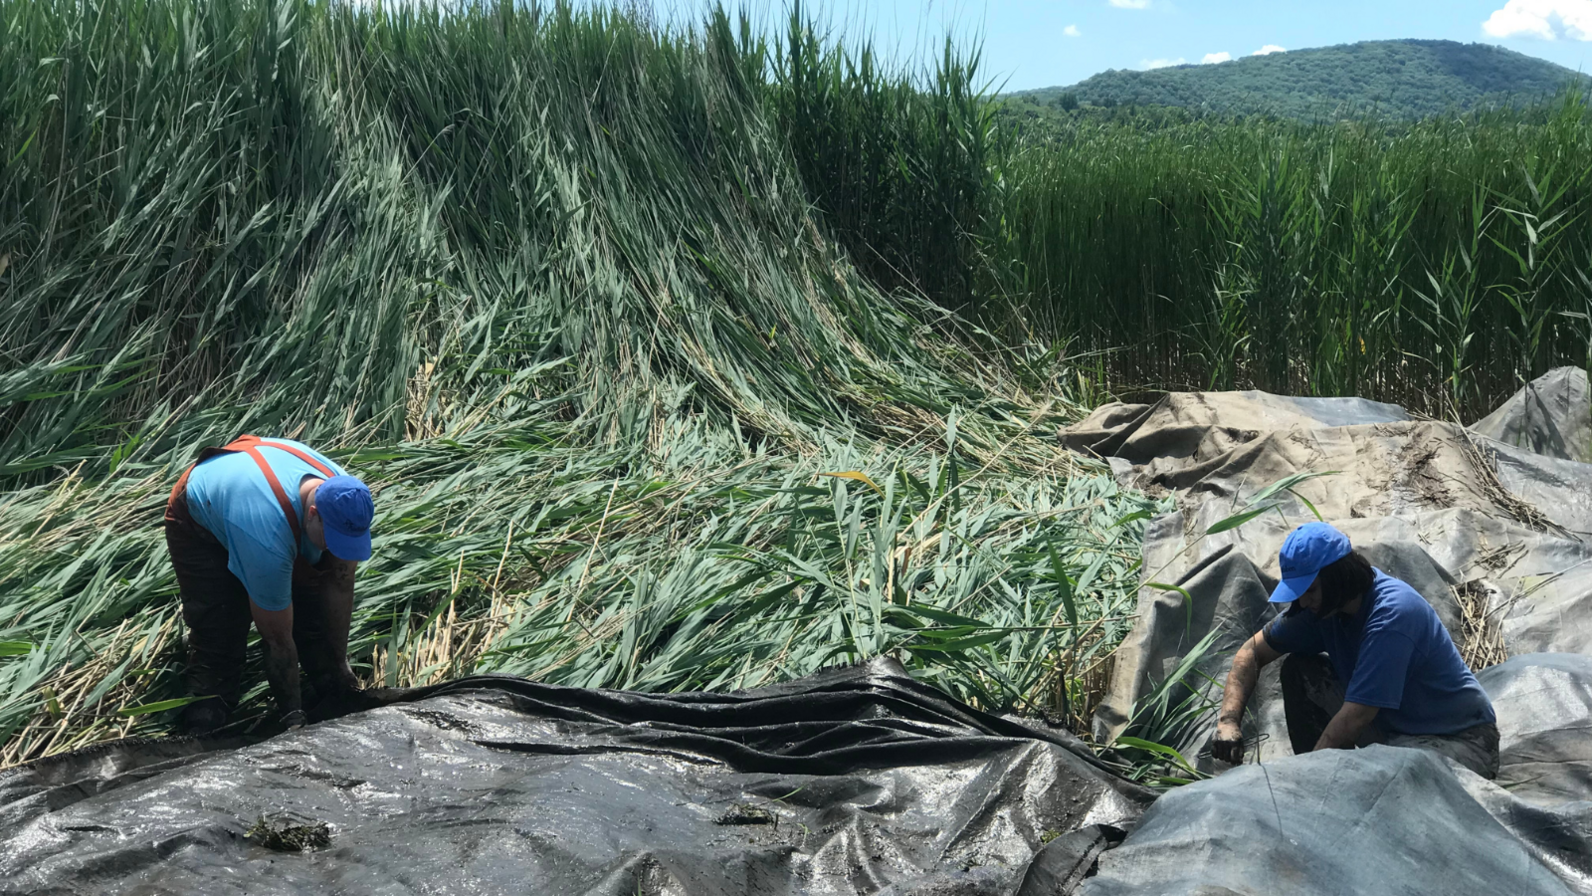 Two people place large black tarps down to cover up patches of Phragmites, a tall green reed.